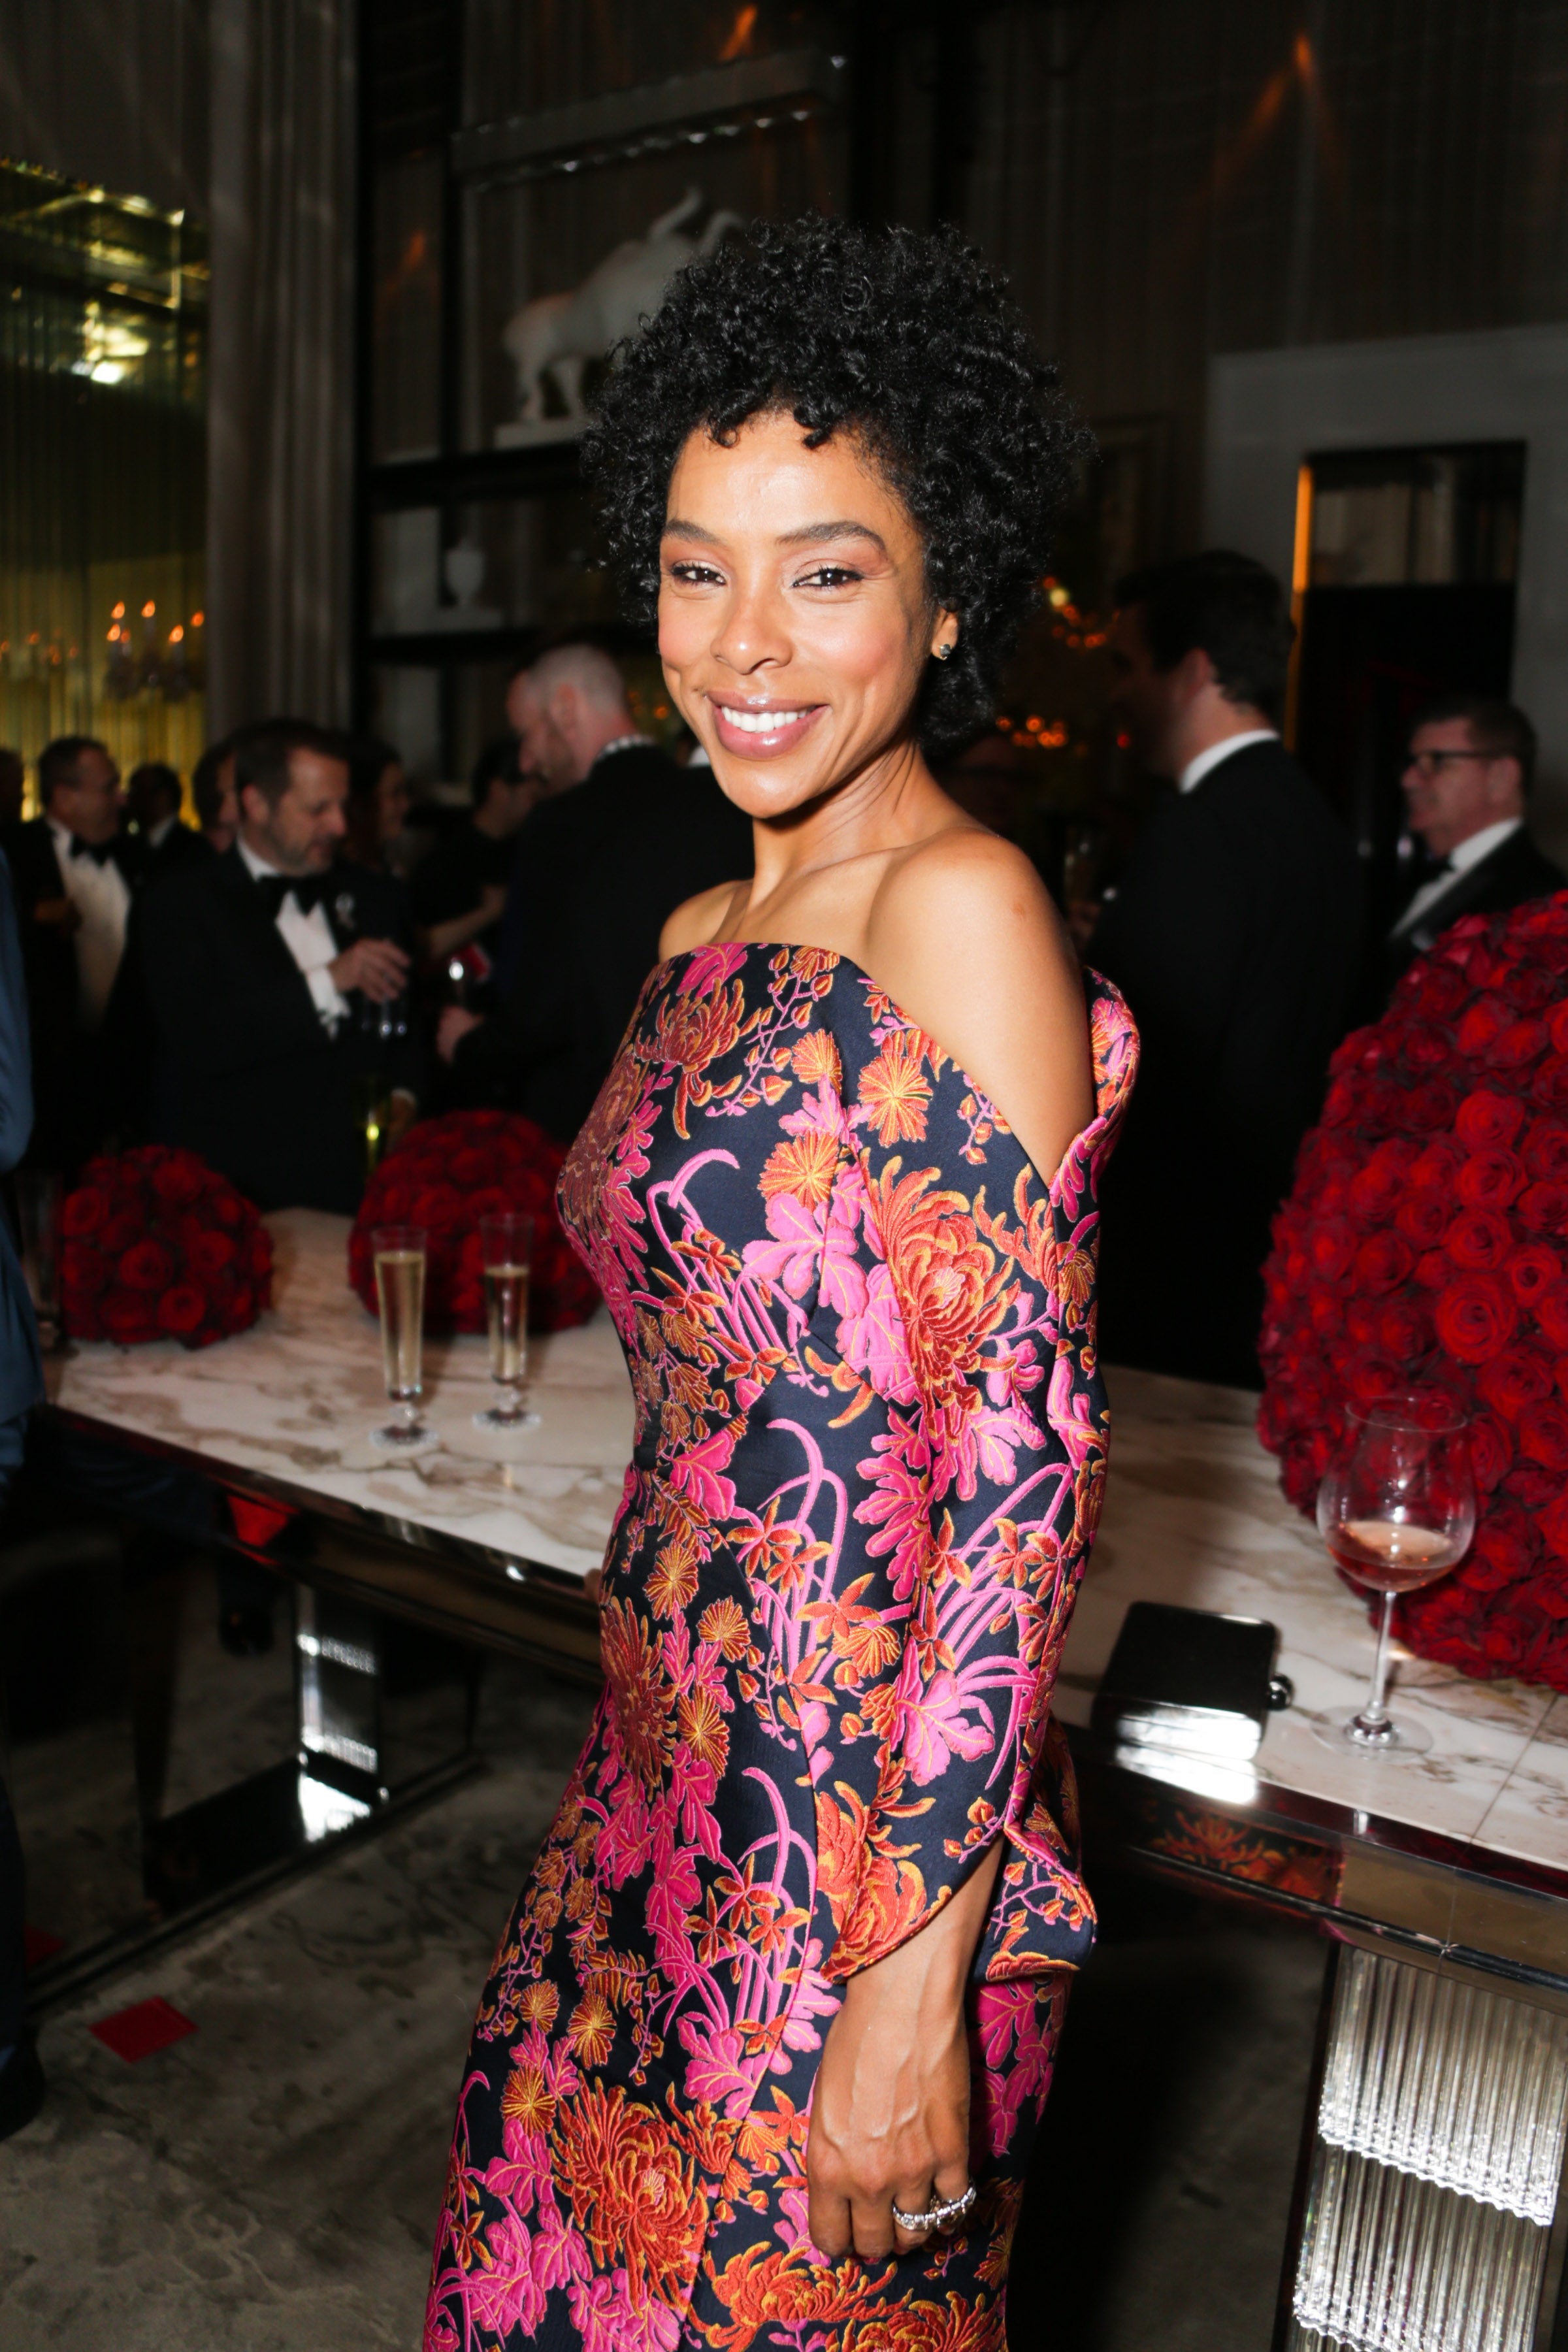 Harvey Weinstein Reportedly Fired Sophie Okonedo Because She Wasn't 'F--kable'
